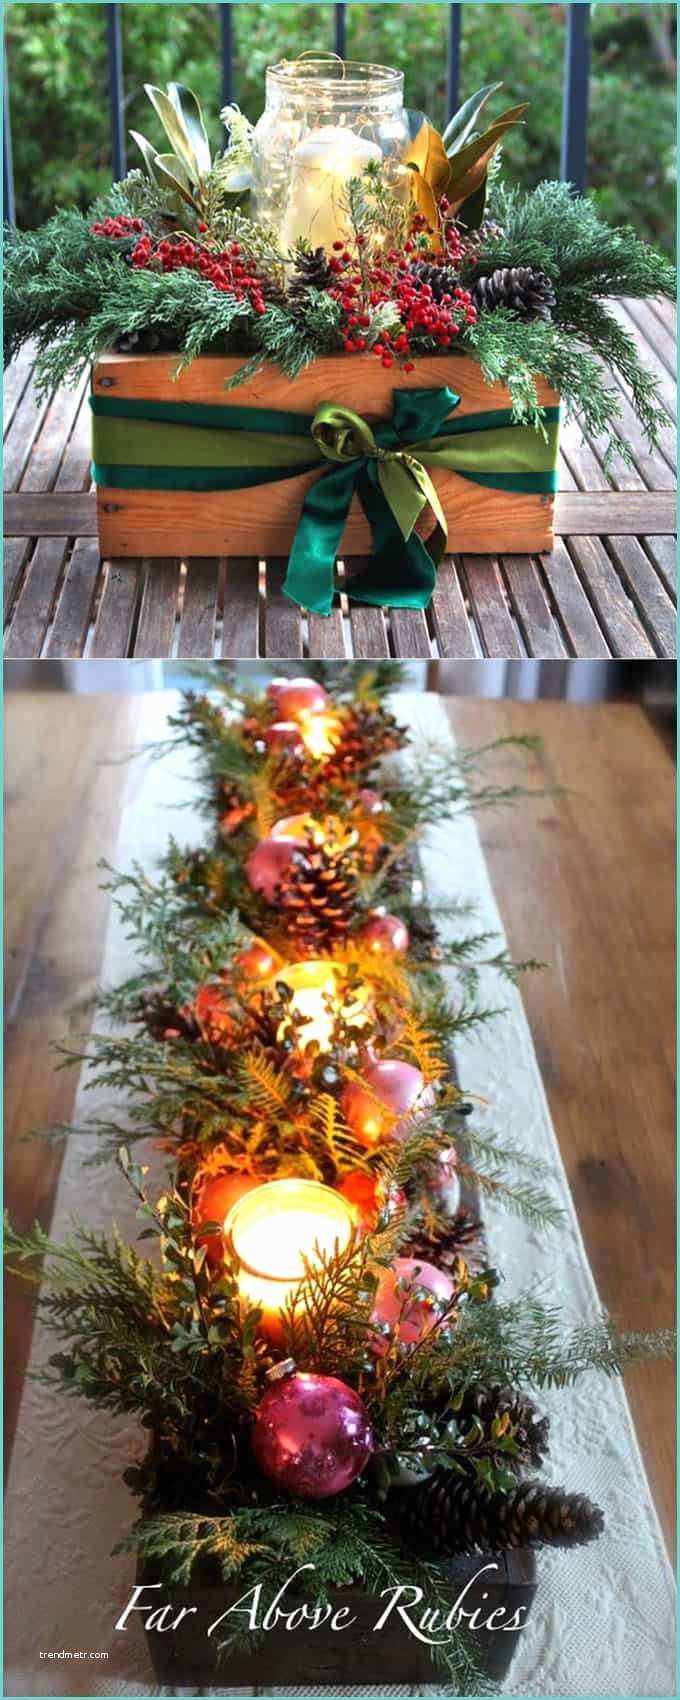 Ides Dcoration Table Noel 27 Gorgeous Diy Thanksgiving & Christmas Table Decorations